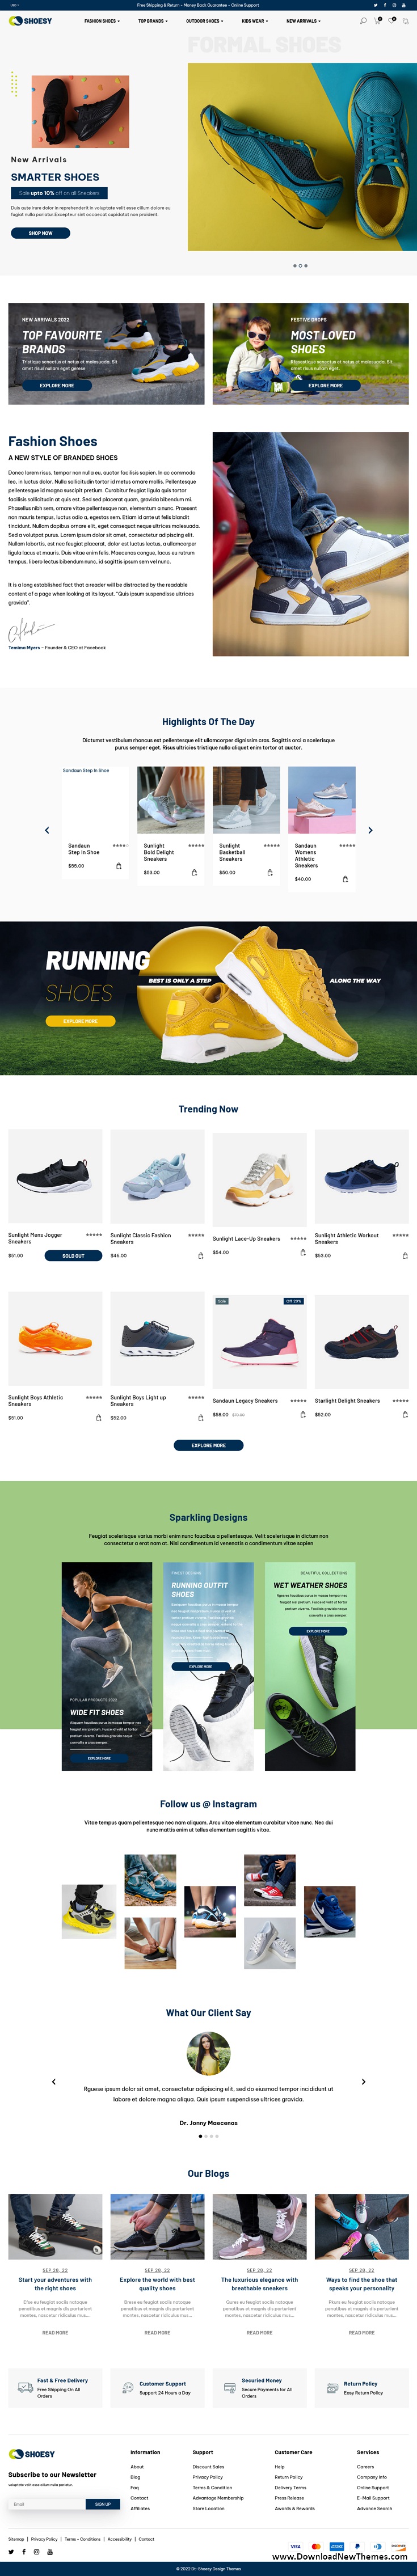 Shoesy - Footwear, Shoes Store Shopify Theme Review